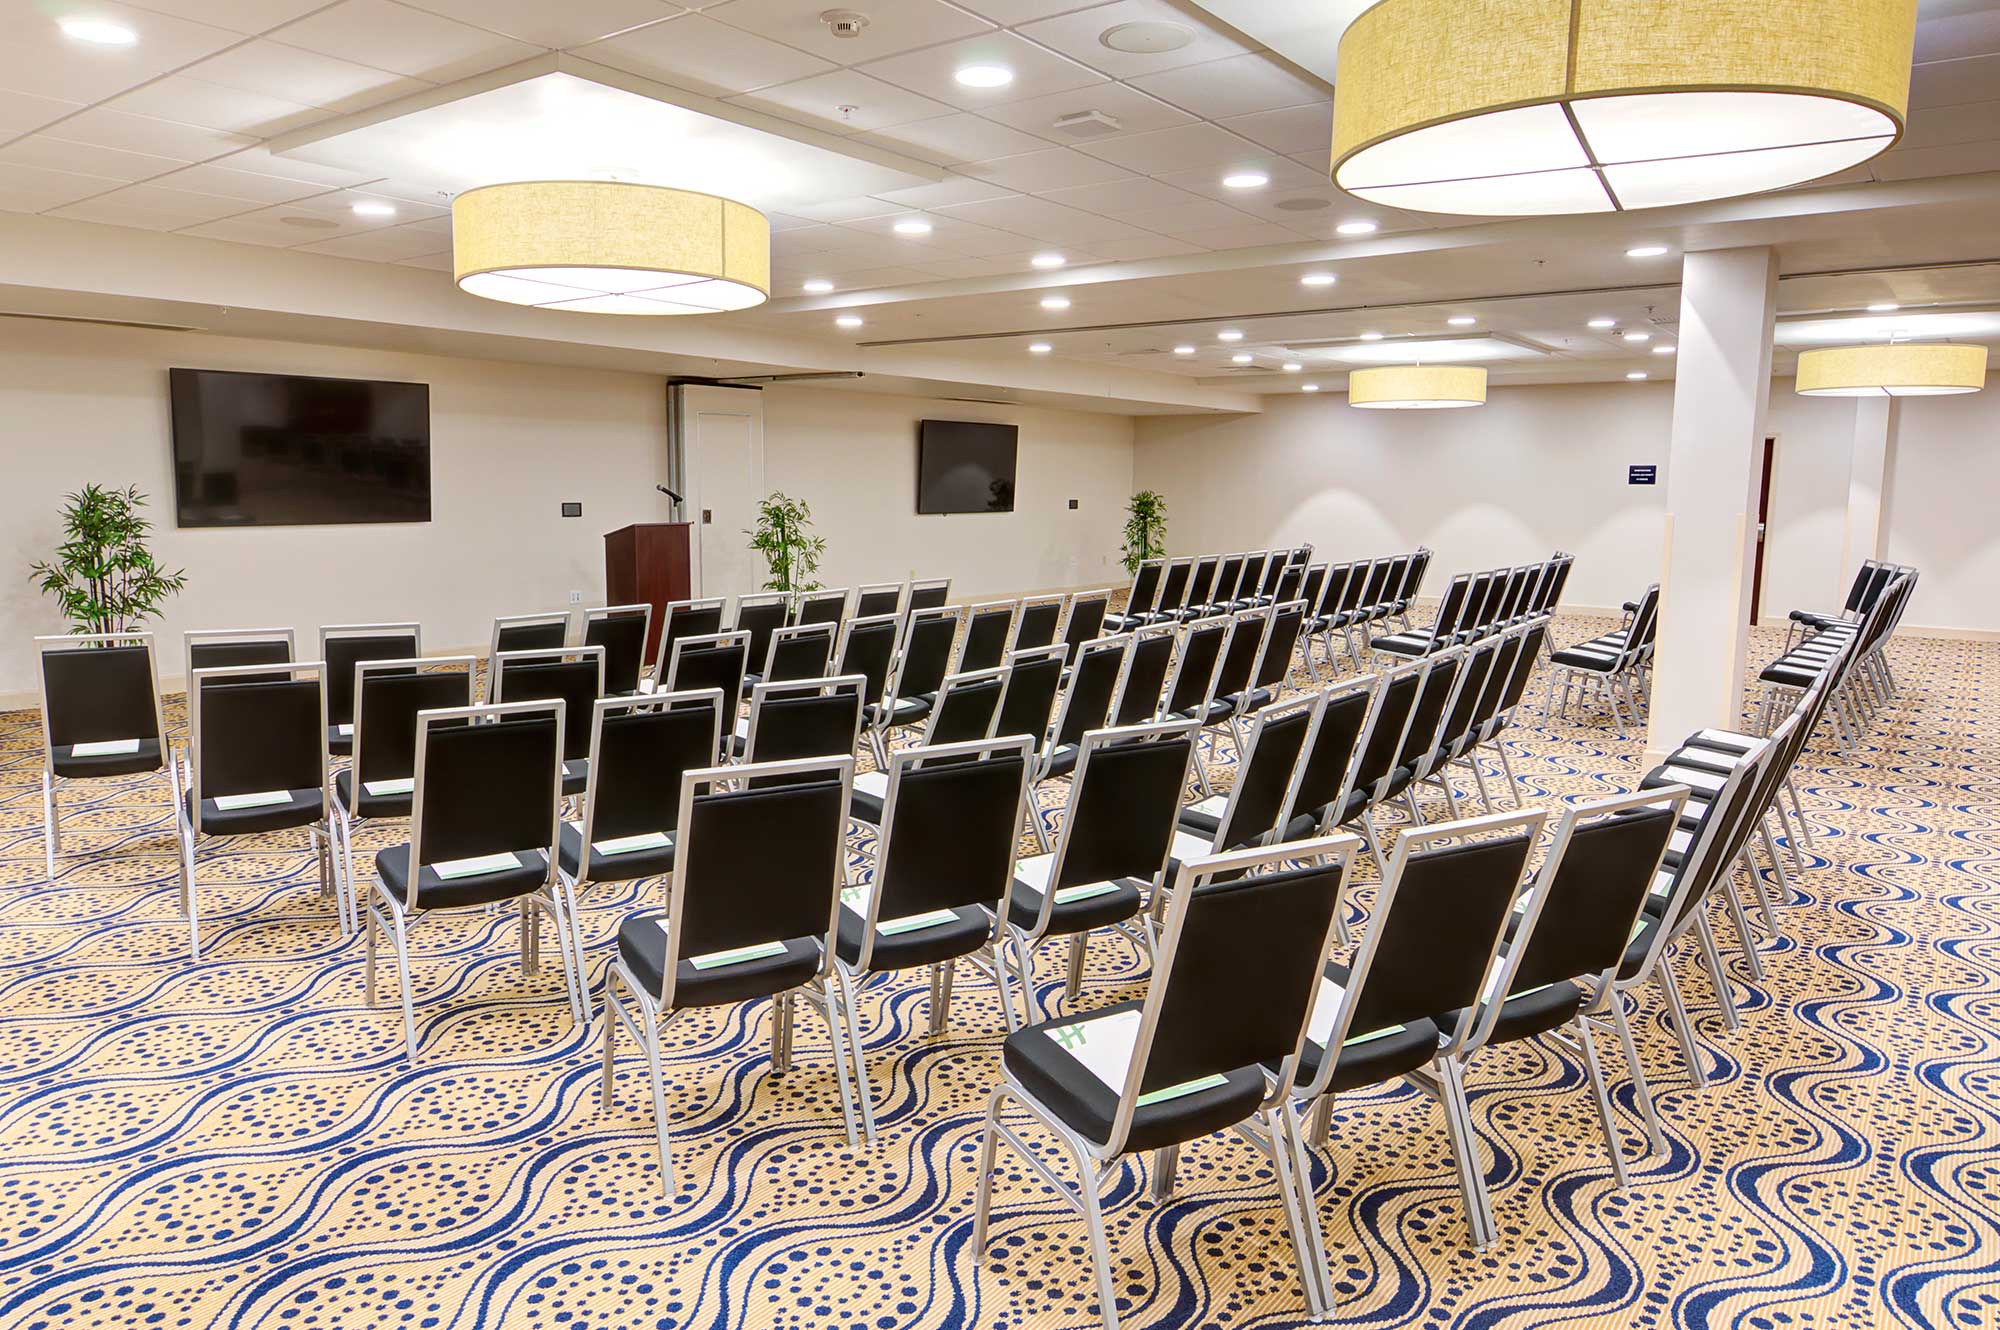 Event Space for seminars, meetings, office outings and more